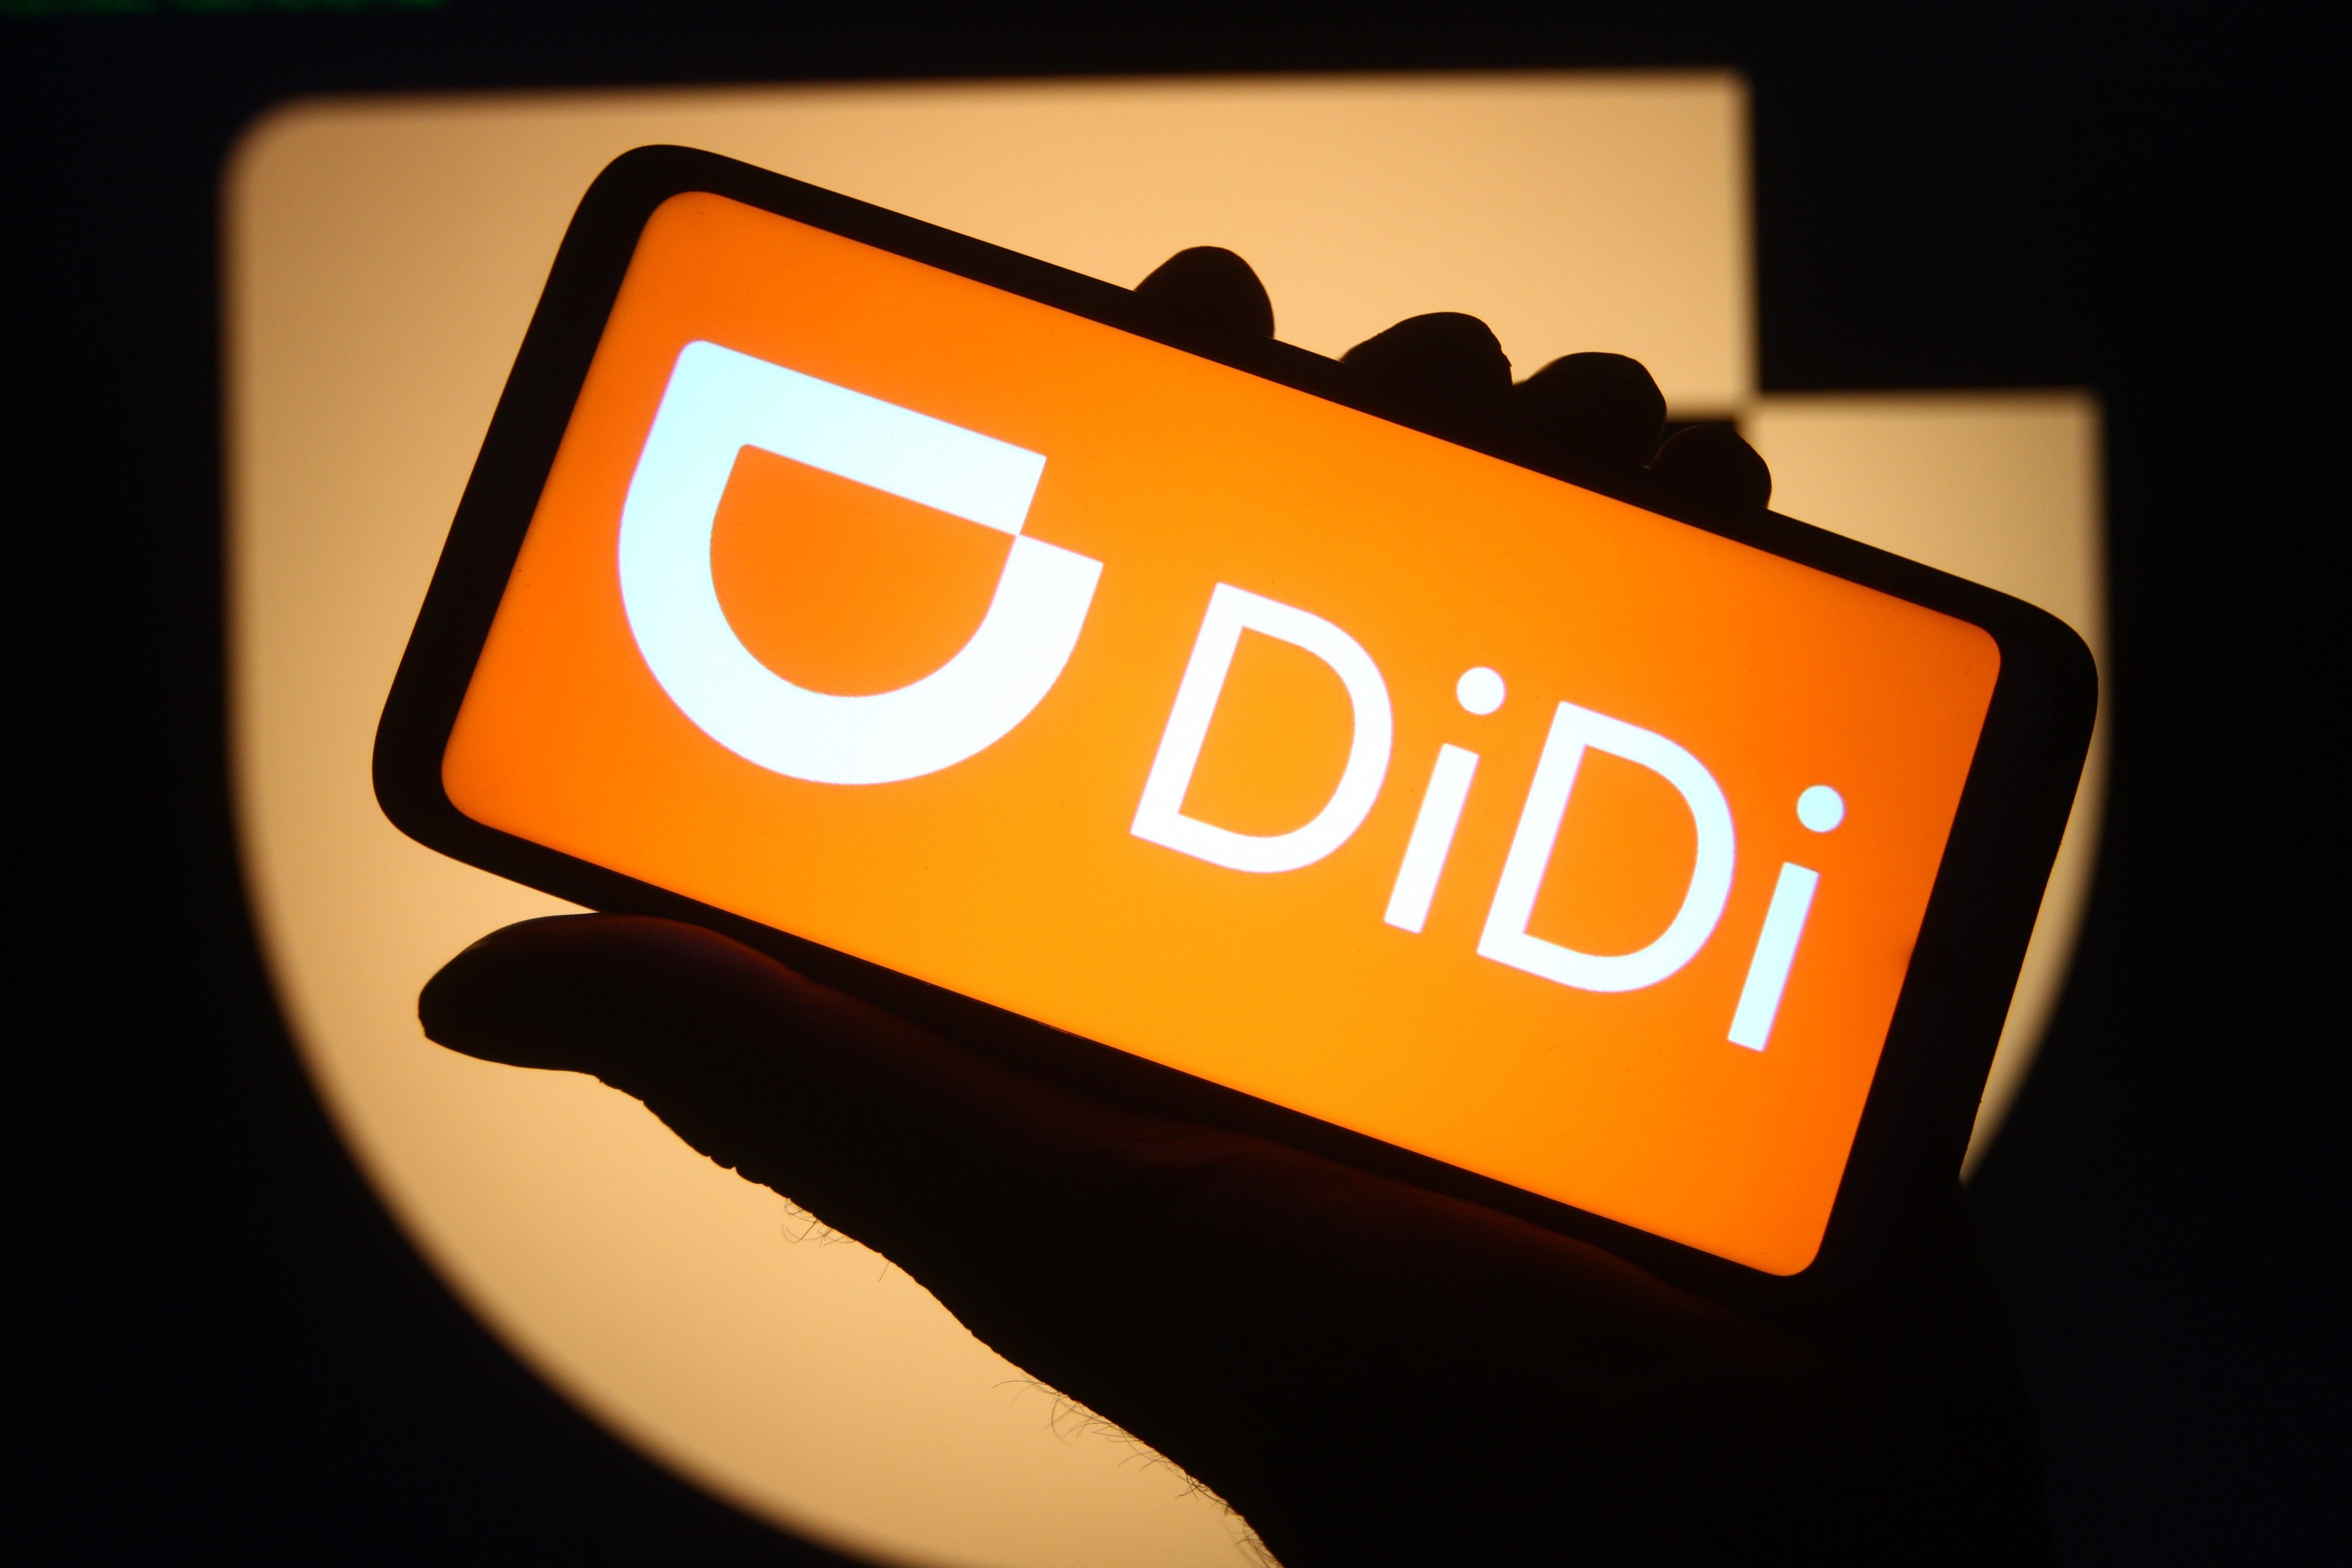 Didi’s strong first-quarter performance showed how it continues to dominate China’s ride-hailing market. Photo: Shutterstock